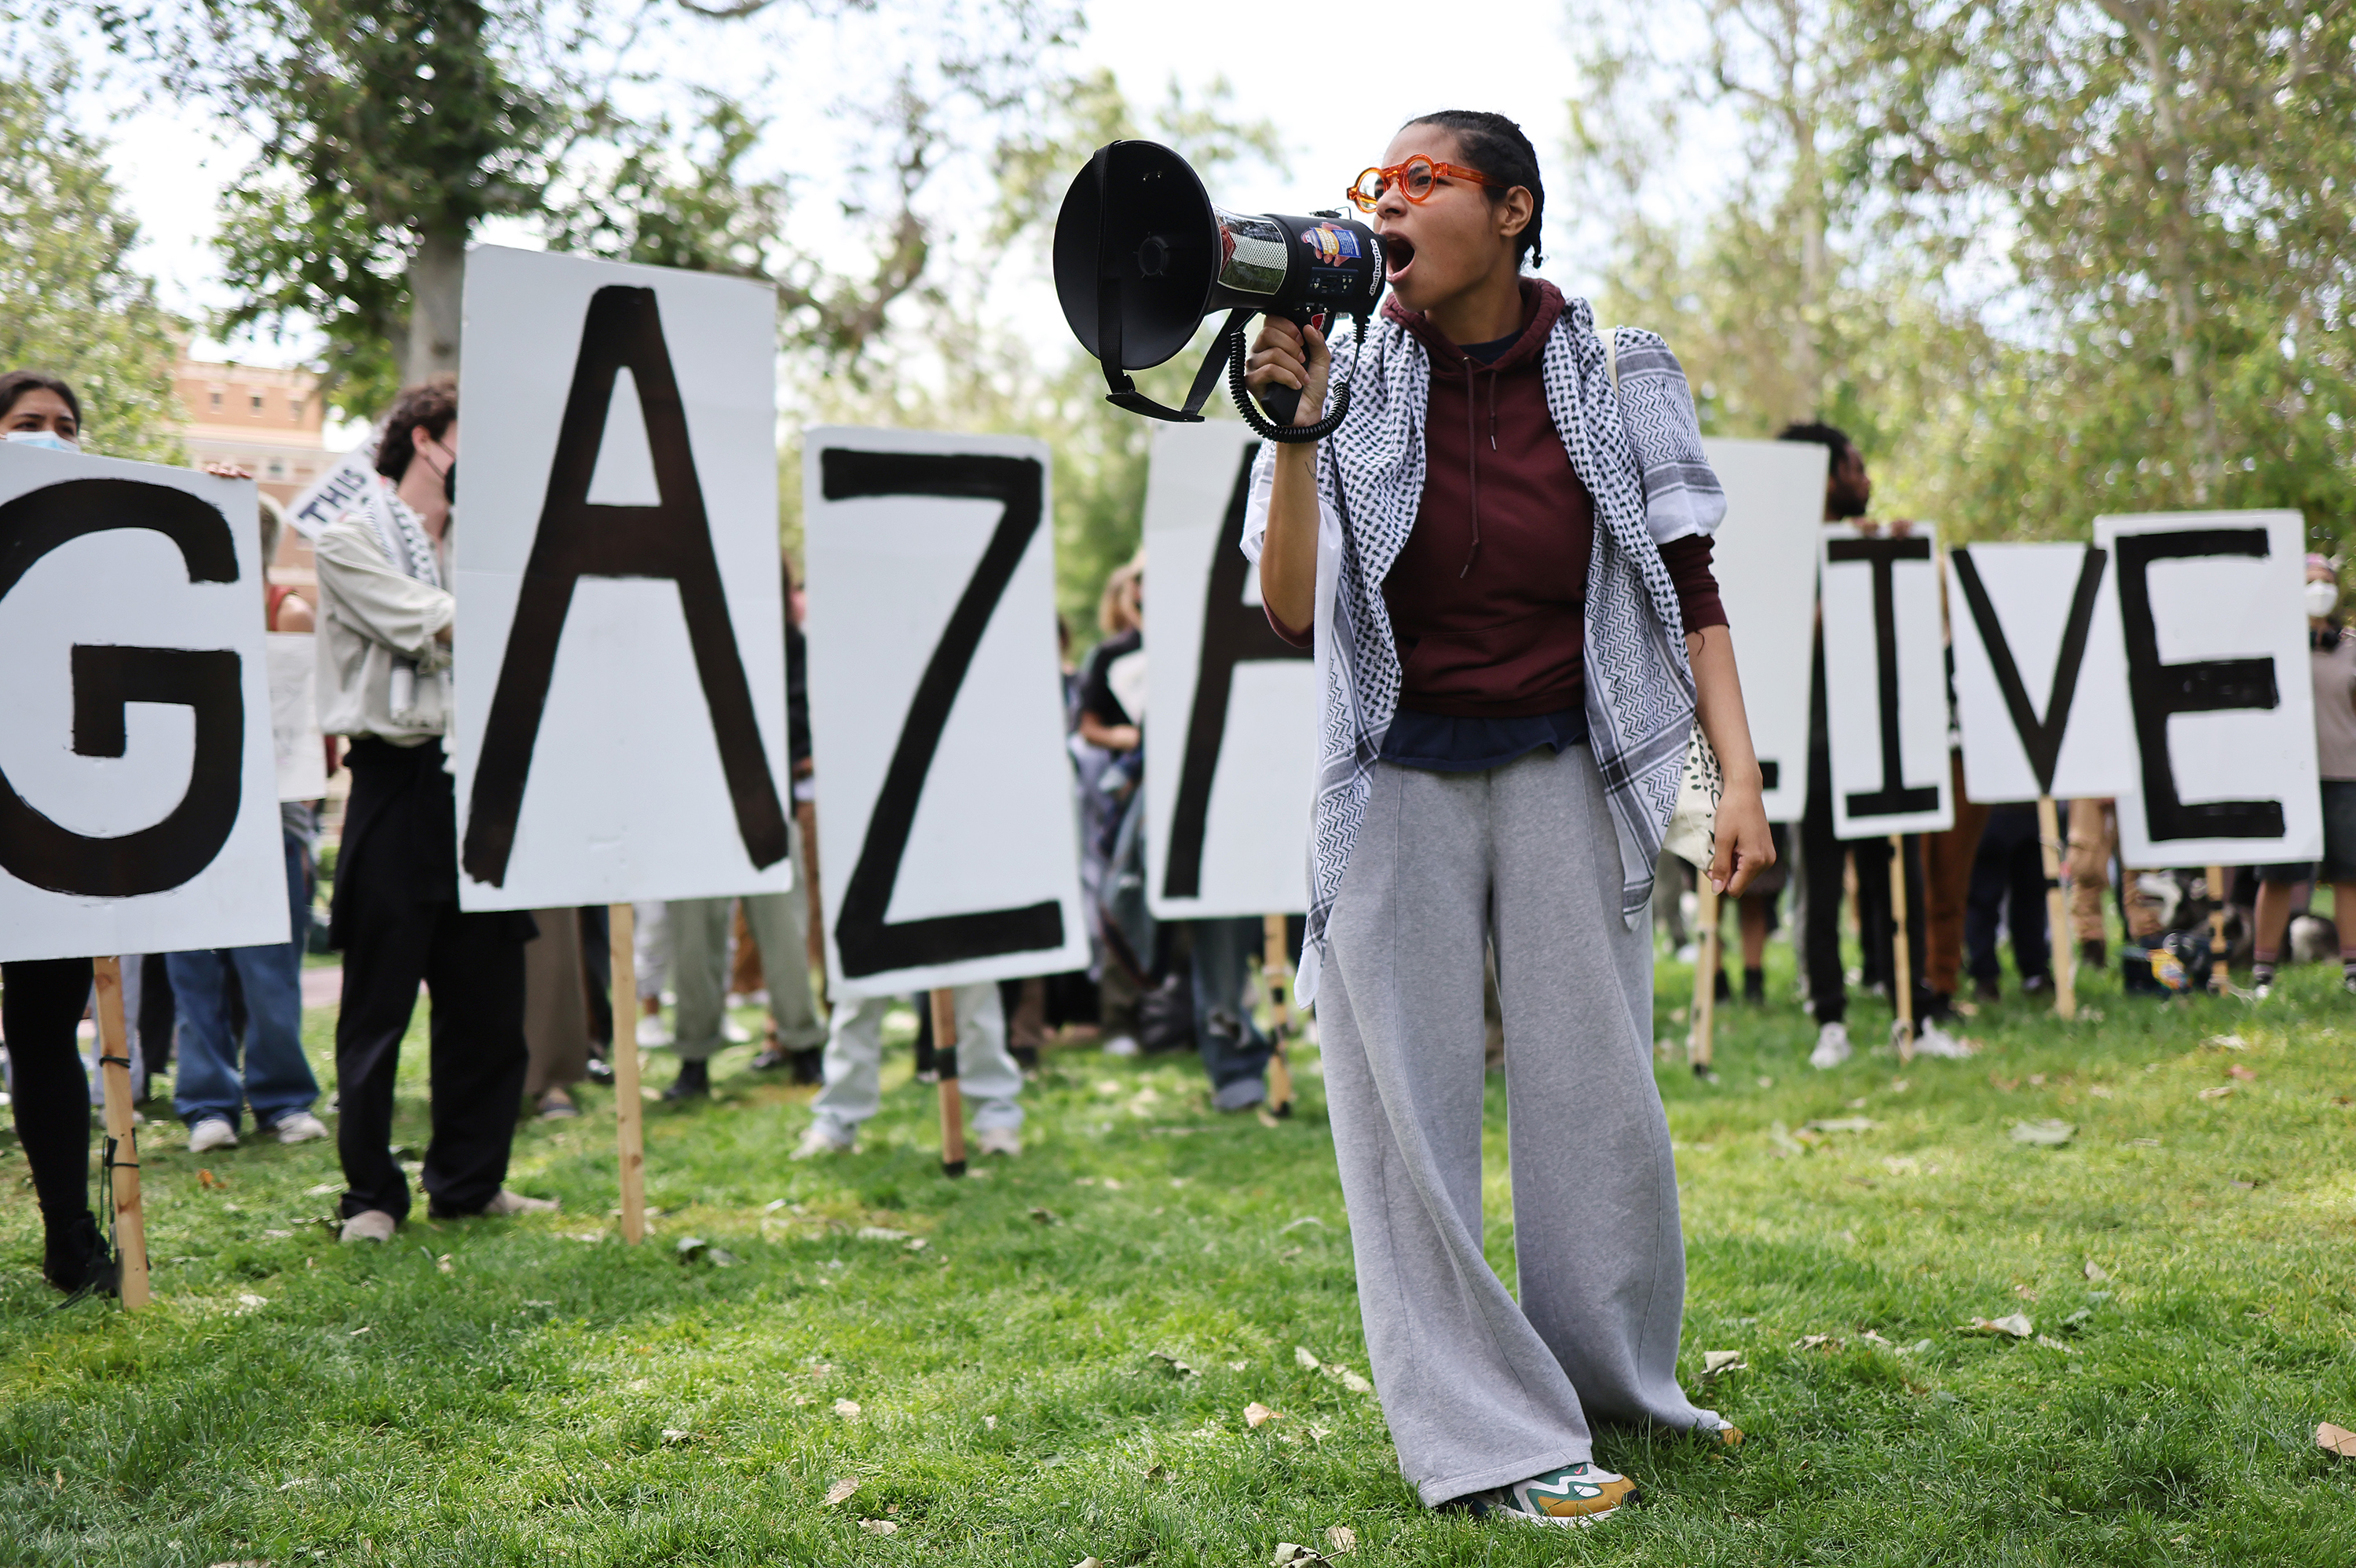 Pro-Palestine demonstrators rally at an encampment in support of Gaza at the University of Southern California on April 24, in Los Angeles, California.